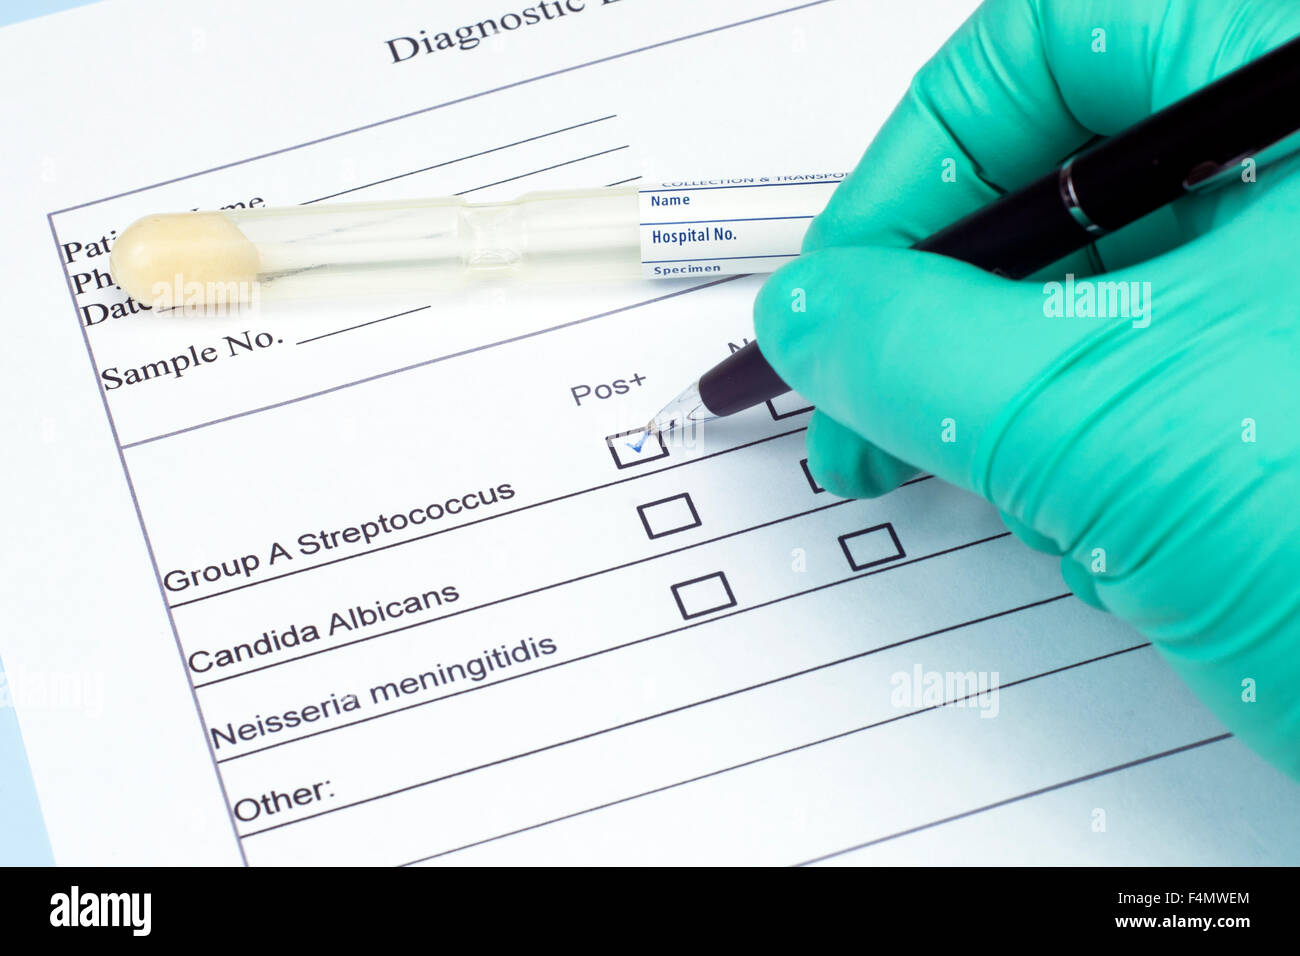 Diagnostic culture swab and holder with streptococcus group A box checked. Stock Photo